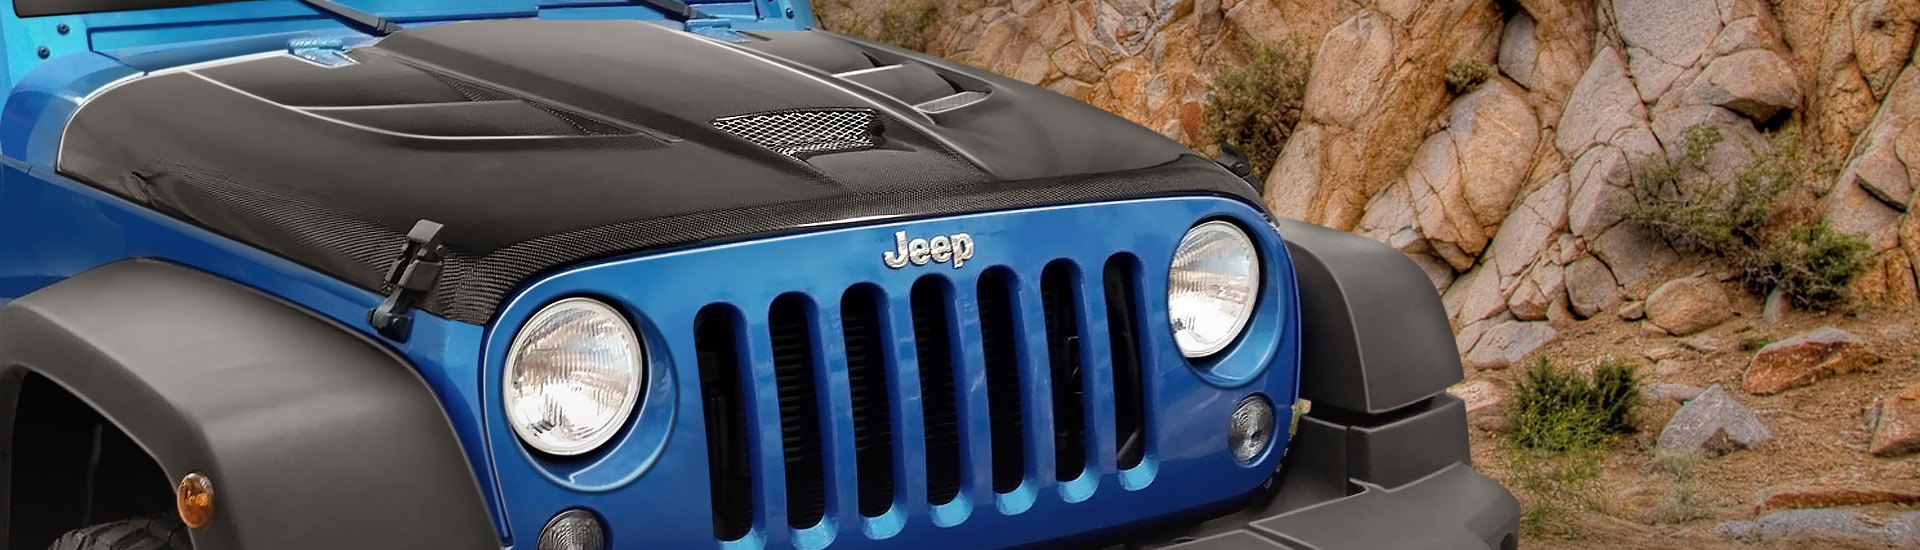 Hellcat Style Carbon Fiber Hood Is Now Available for Jeep Wrangler